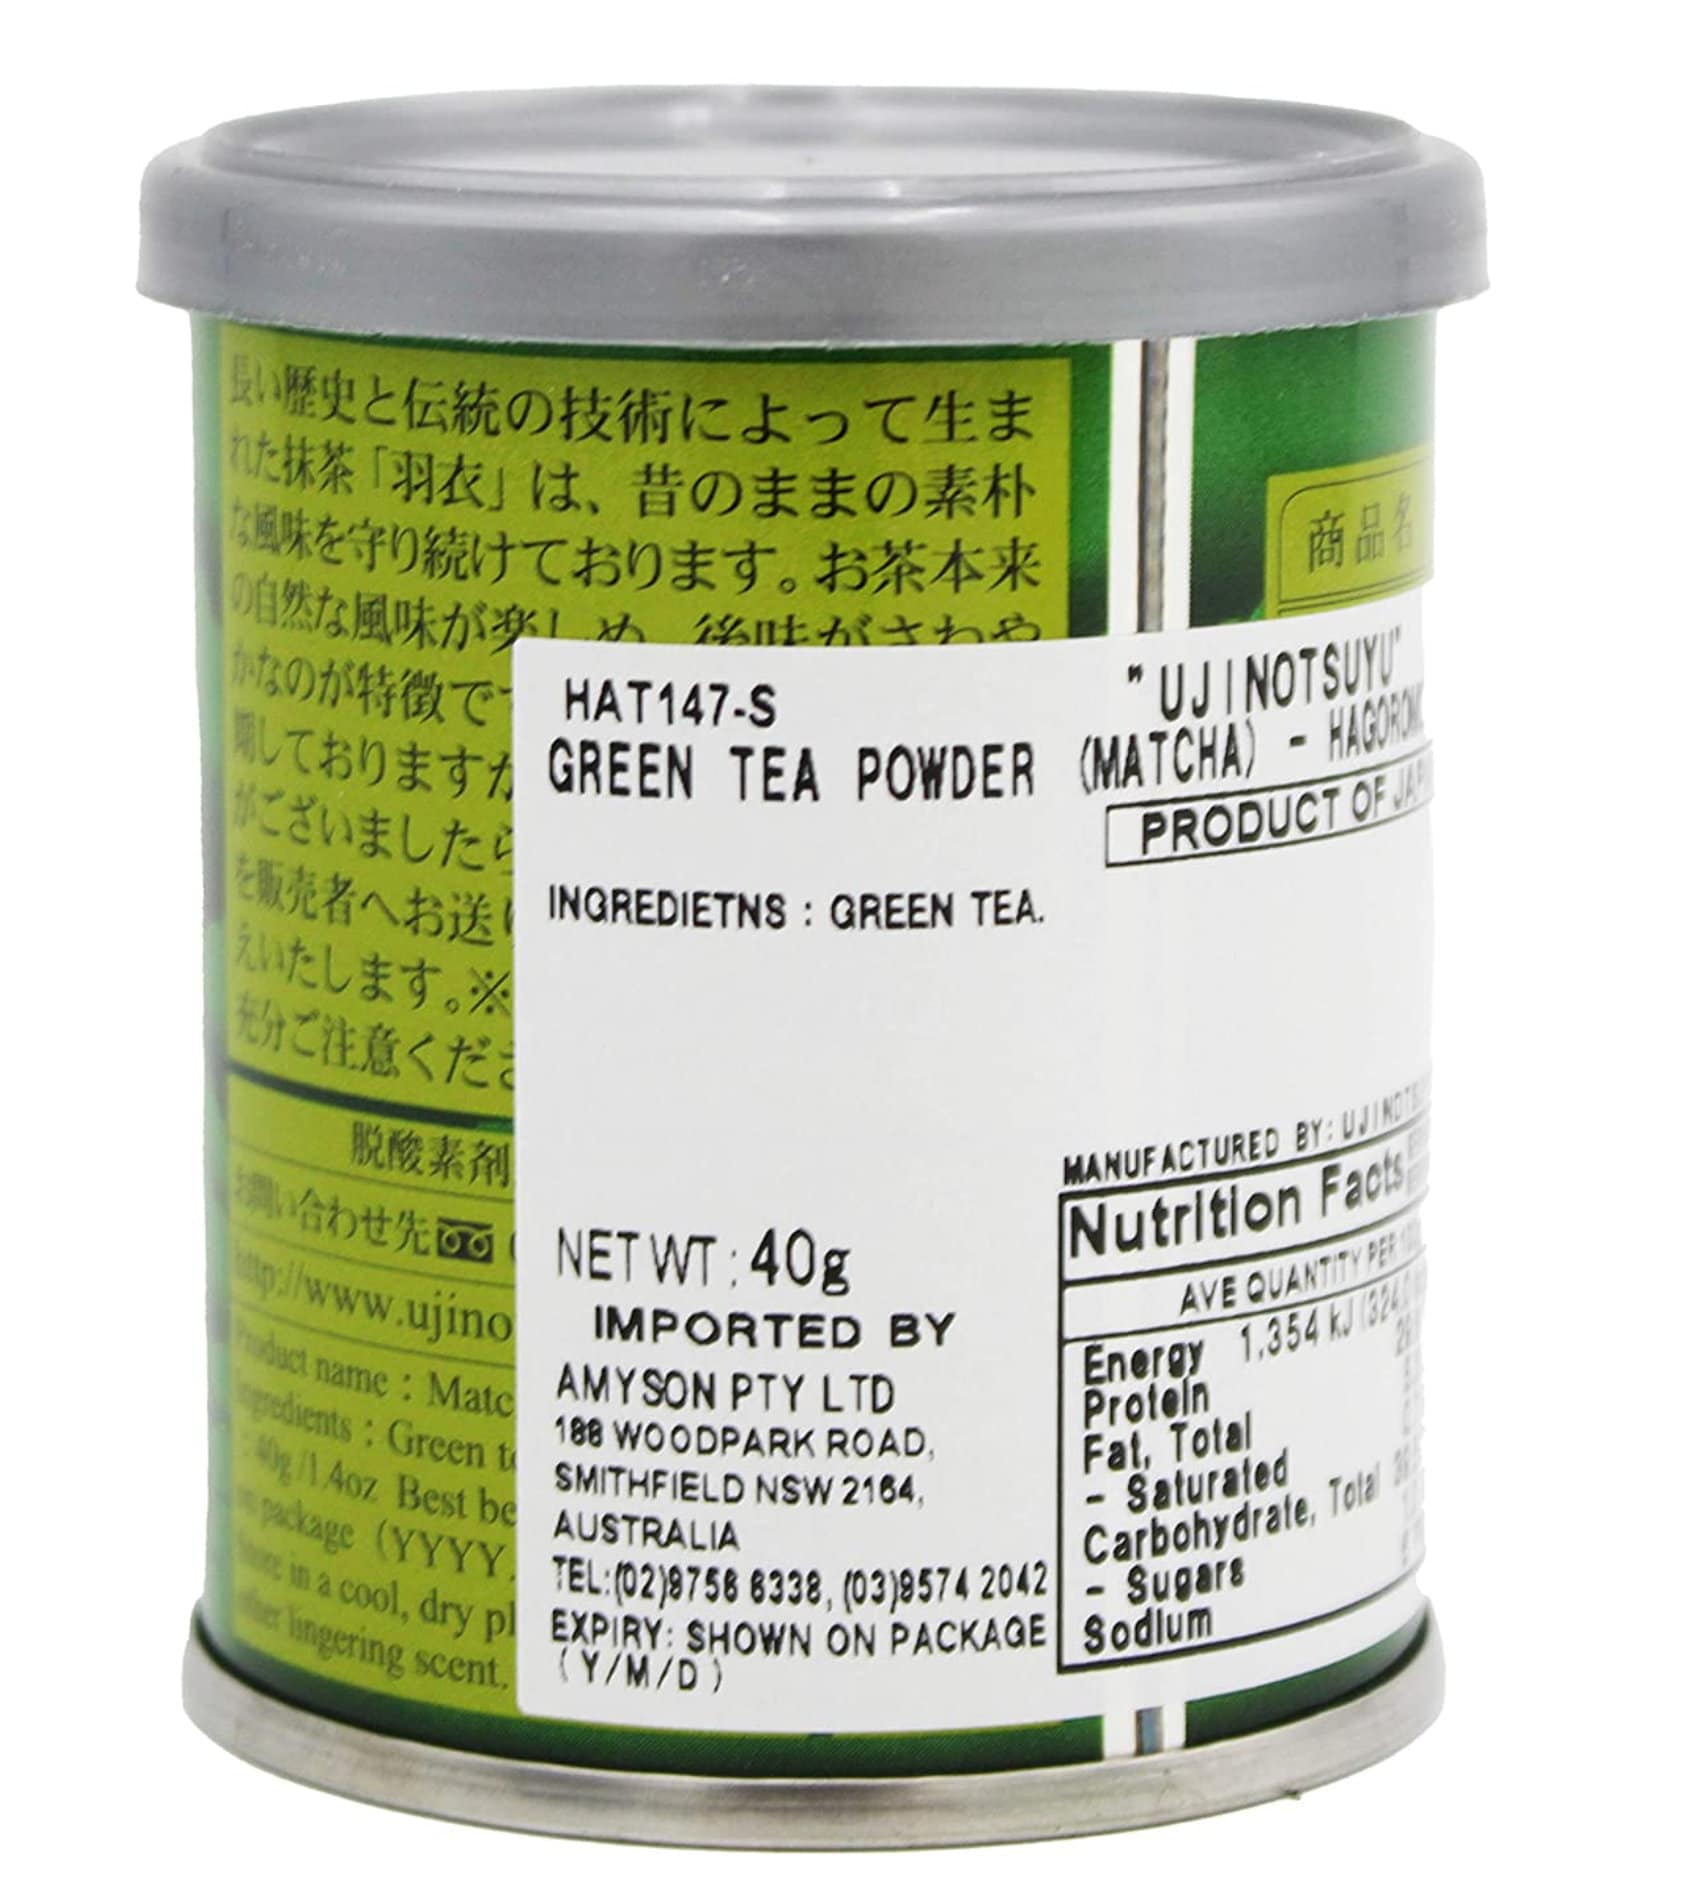 Nestlé presents instant matcha green tea…from a coffee machine - Japan Today